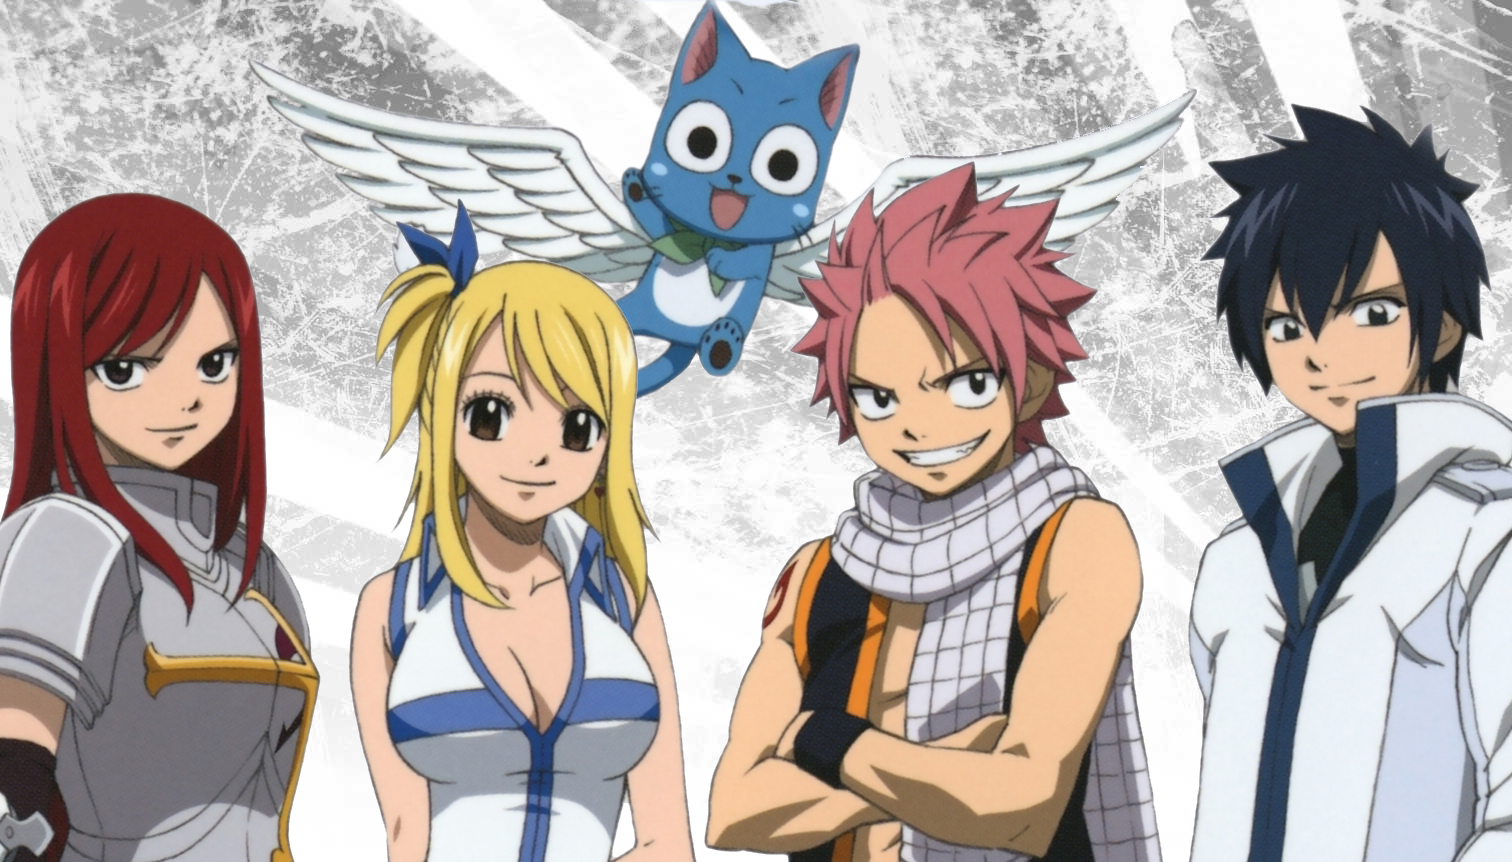 fairy_tail_wallpaper_3_by_music_mup.jpg